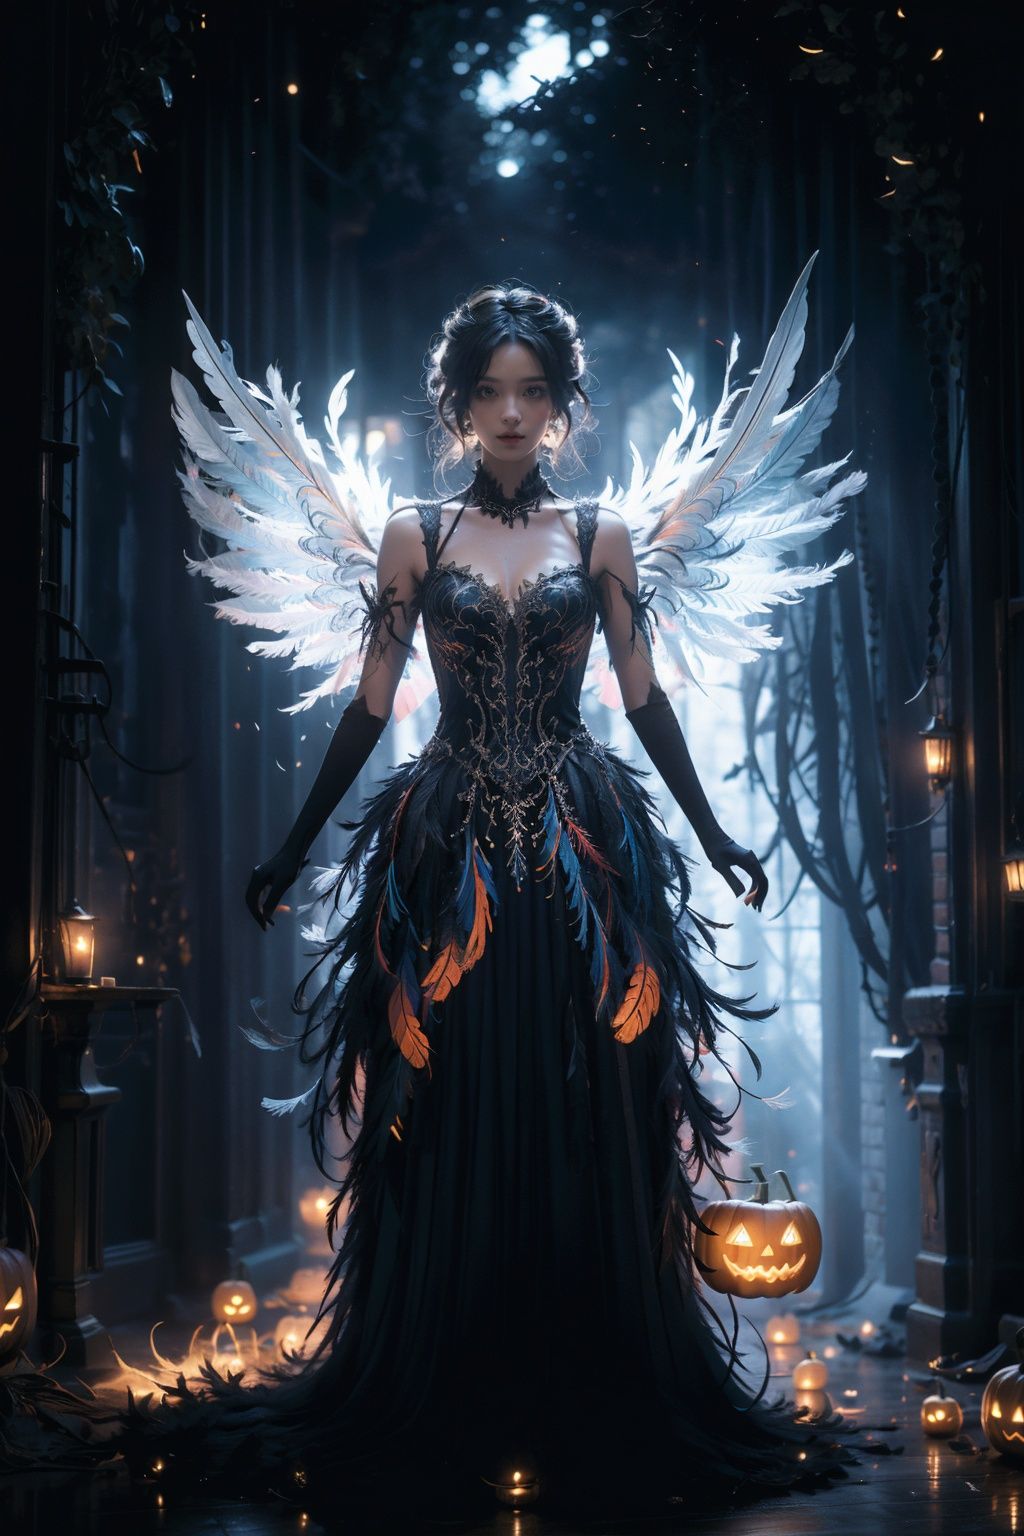  1 girl, feather dress, magical background, feather wings, full body, silhouette light, halloween, (cinematic composition:1.3), (depth of field:1.2), (magic atmosphere:1.1), (spooky props:1.0), (bright colors:0.9), (contrasting light and shadow:0.8), (eerie sounds:0.7), (candlelight:0.6).